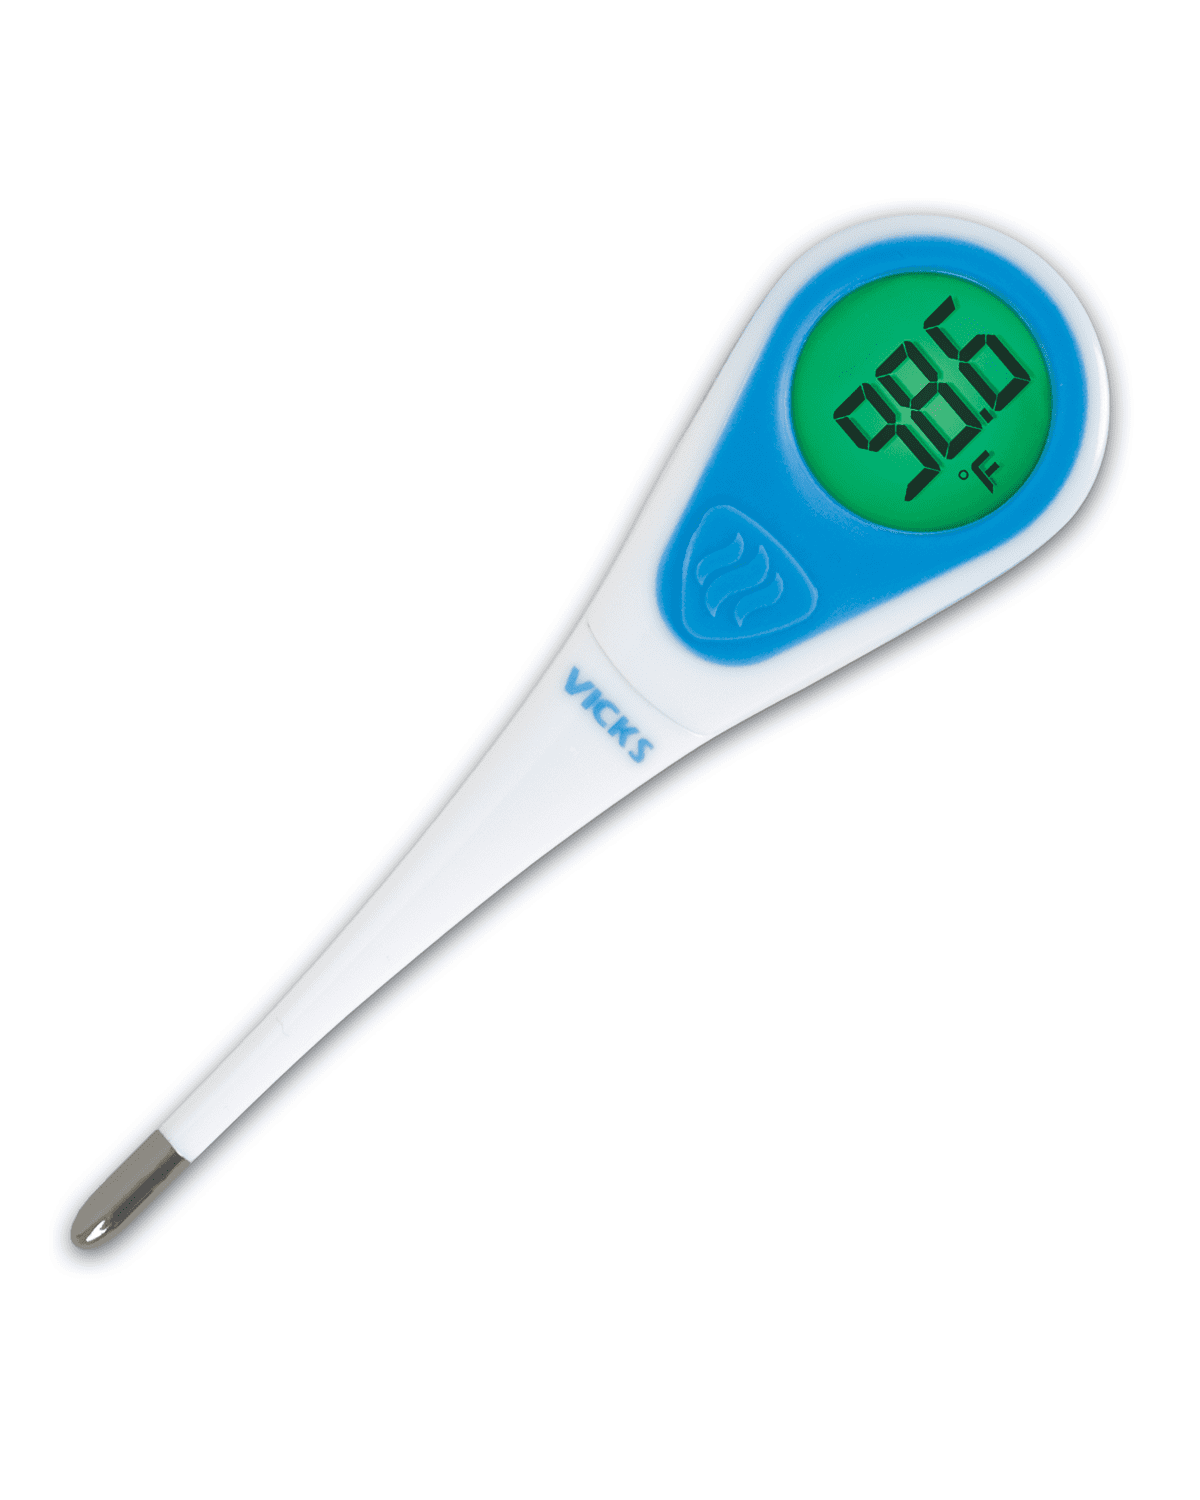 Vicks Speedread Digital Thermometer with Fever Insight Technology, V912